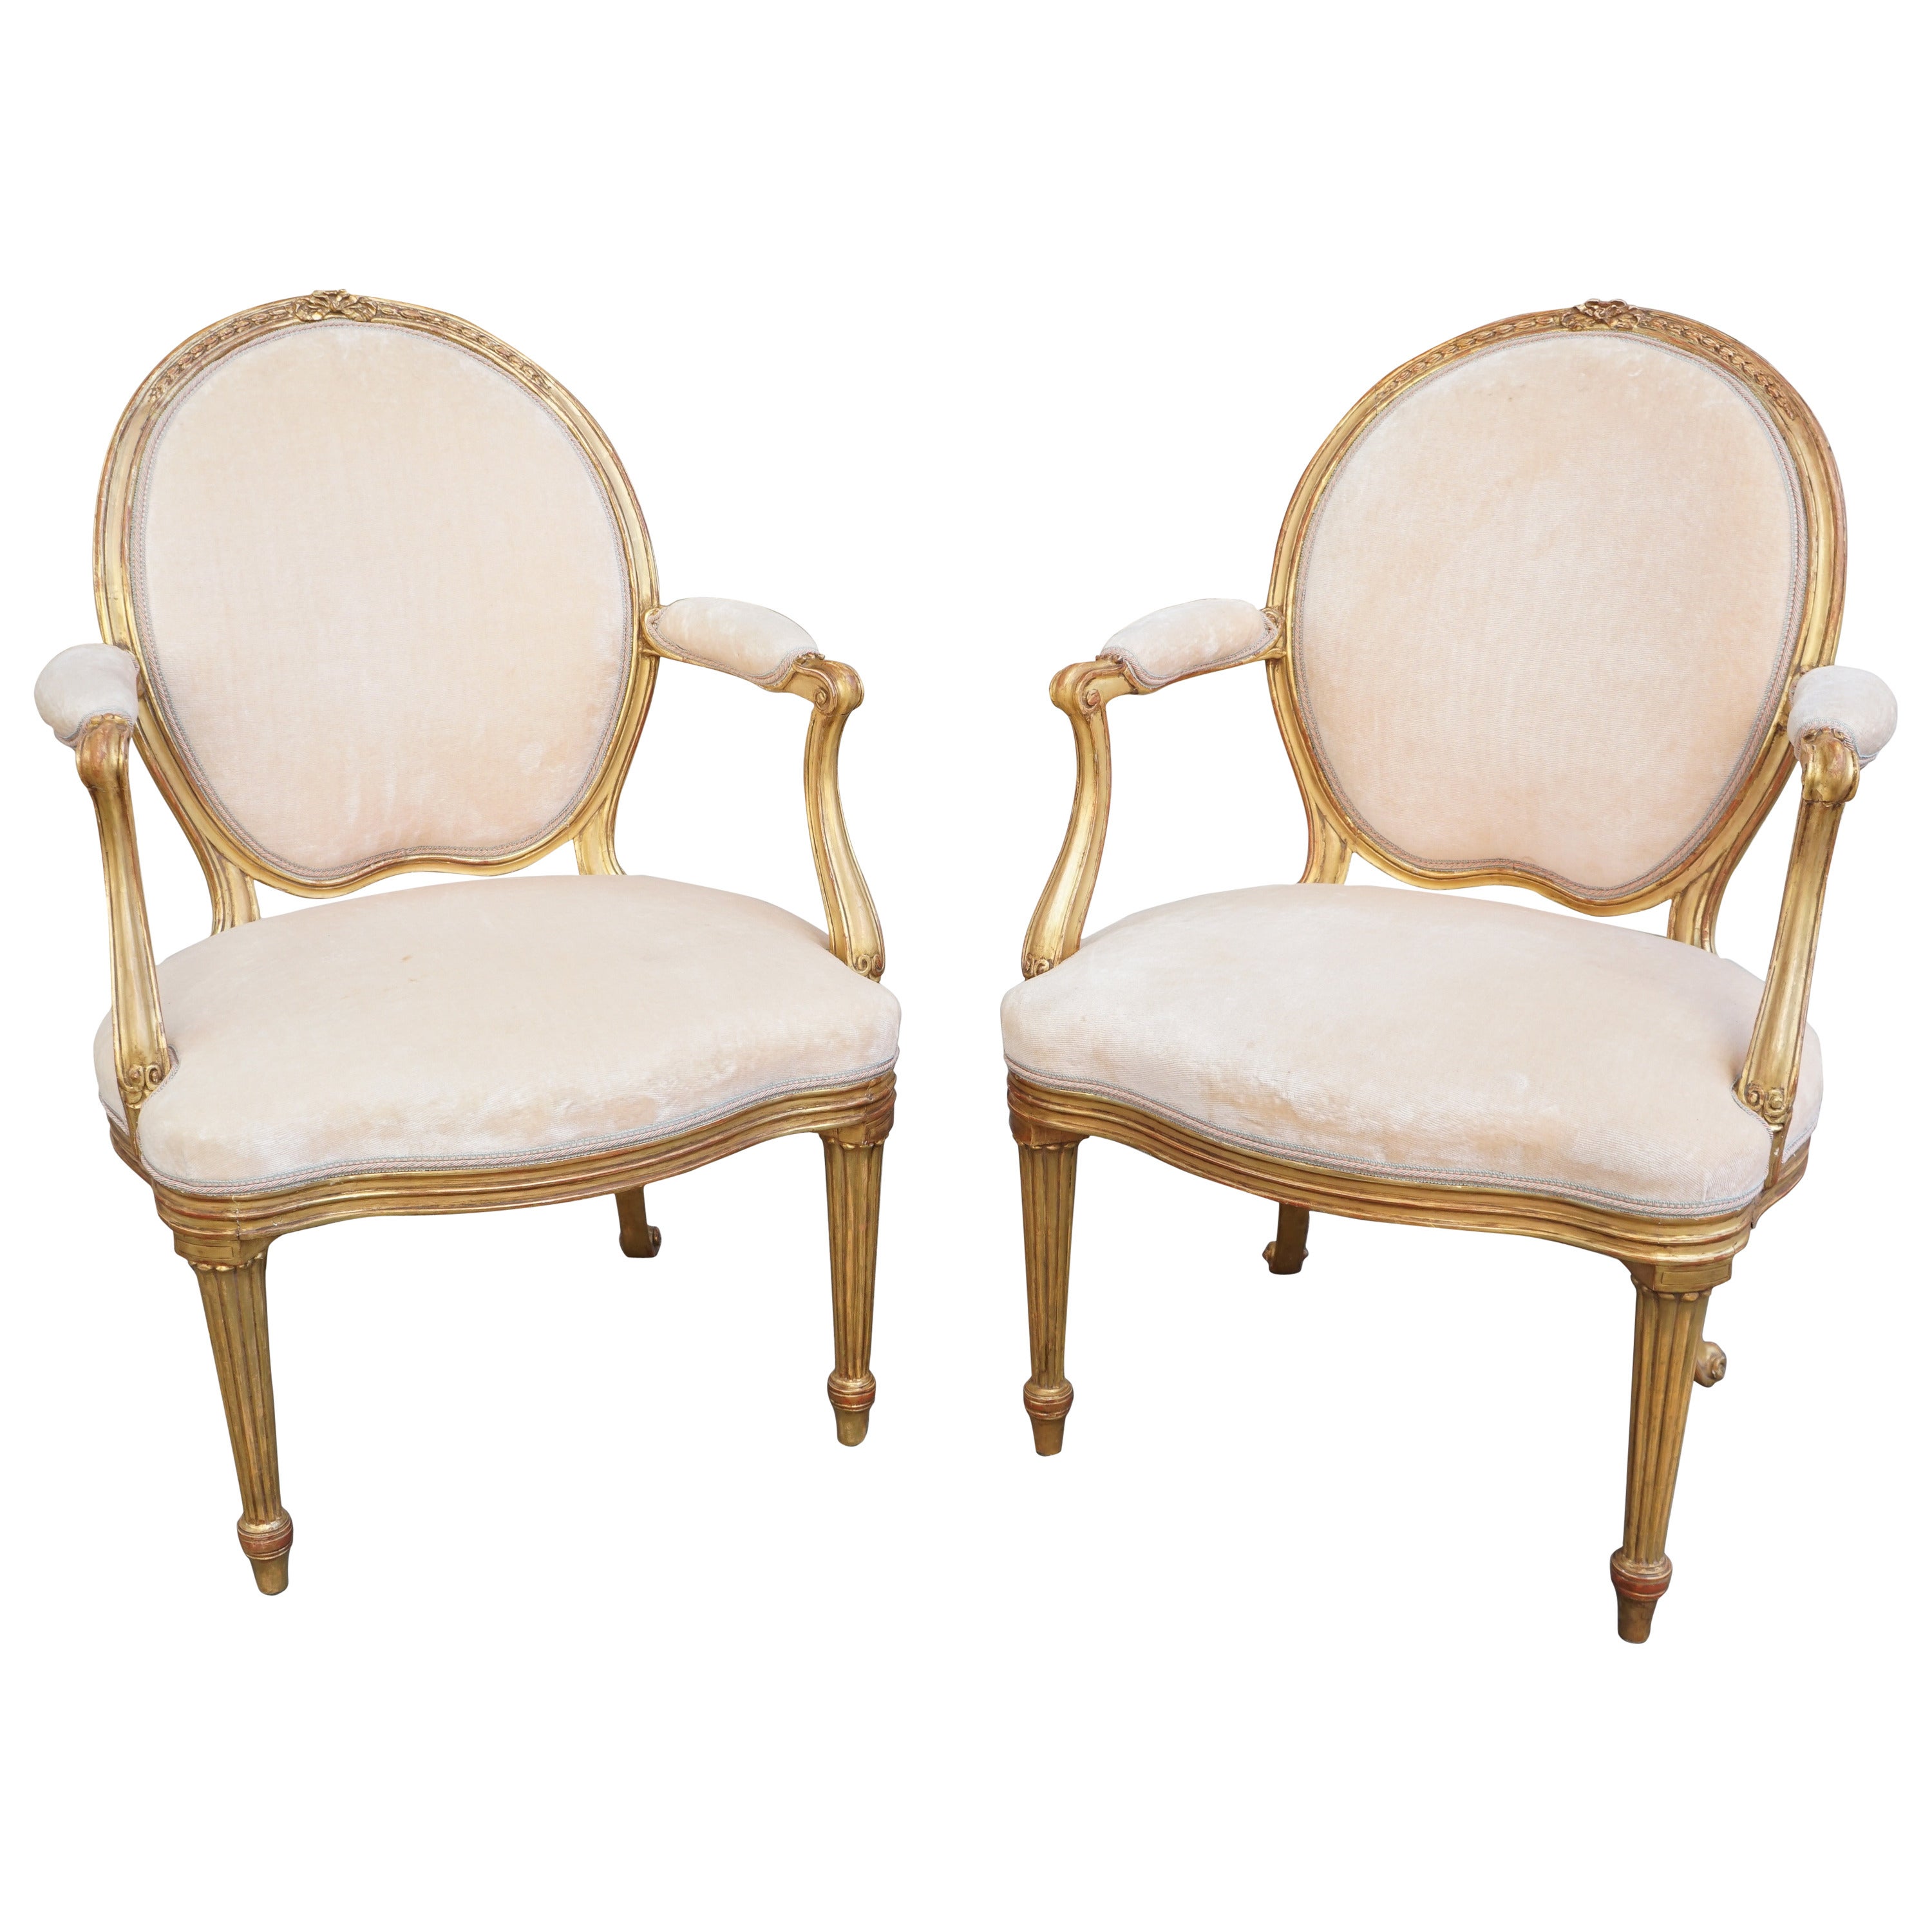 Pair of Period George III Gilded Open Armchairs in the Manner of George Seddon